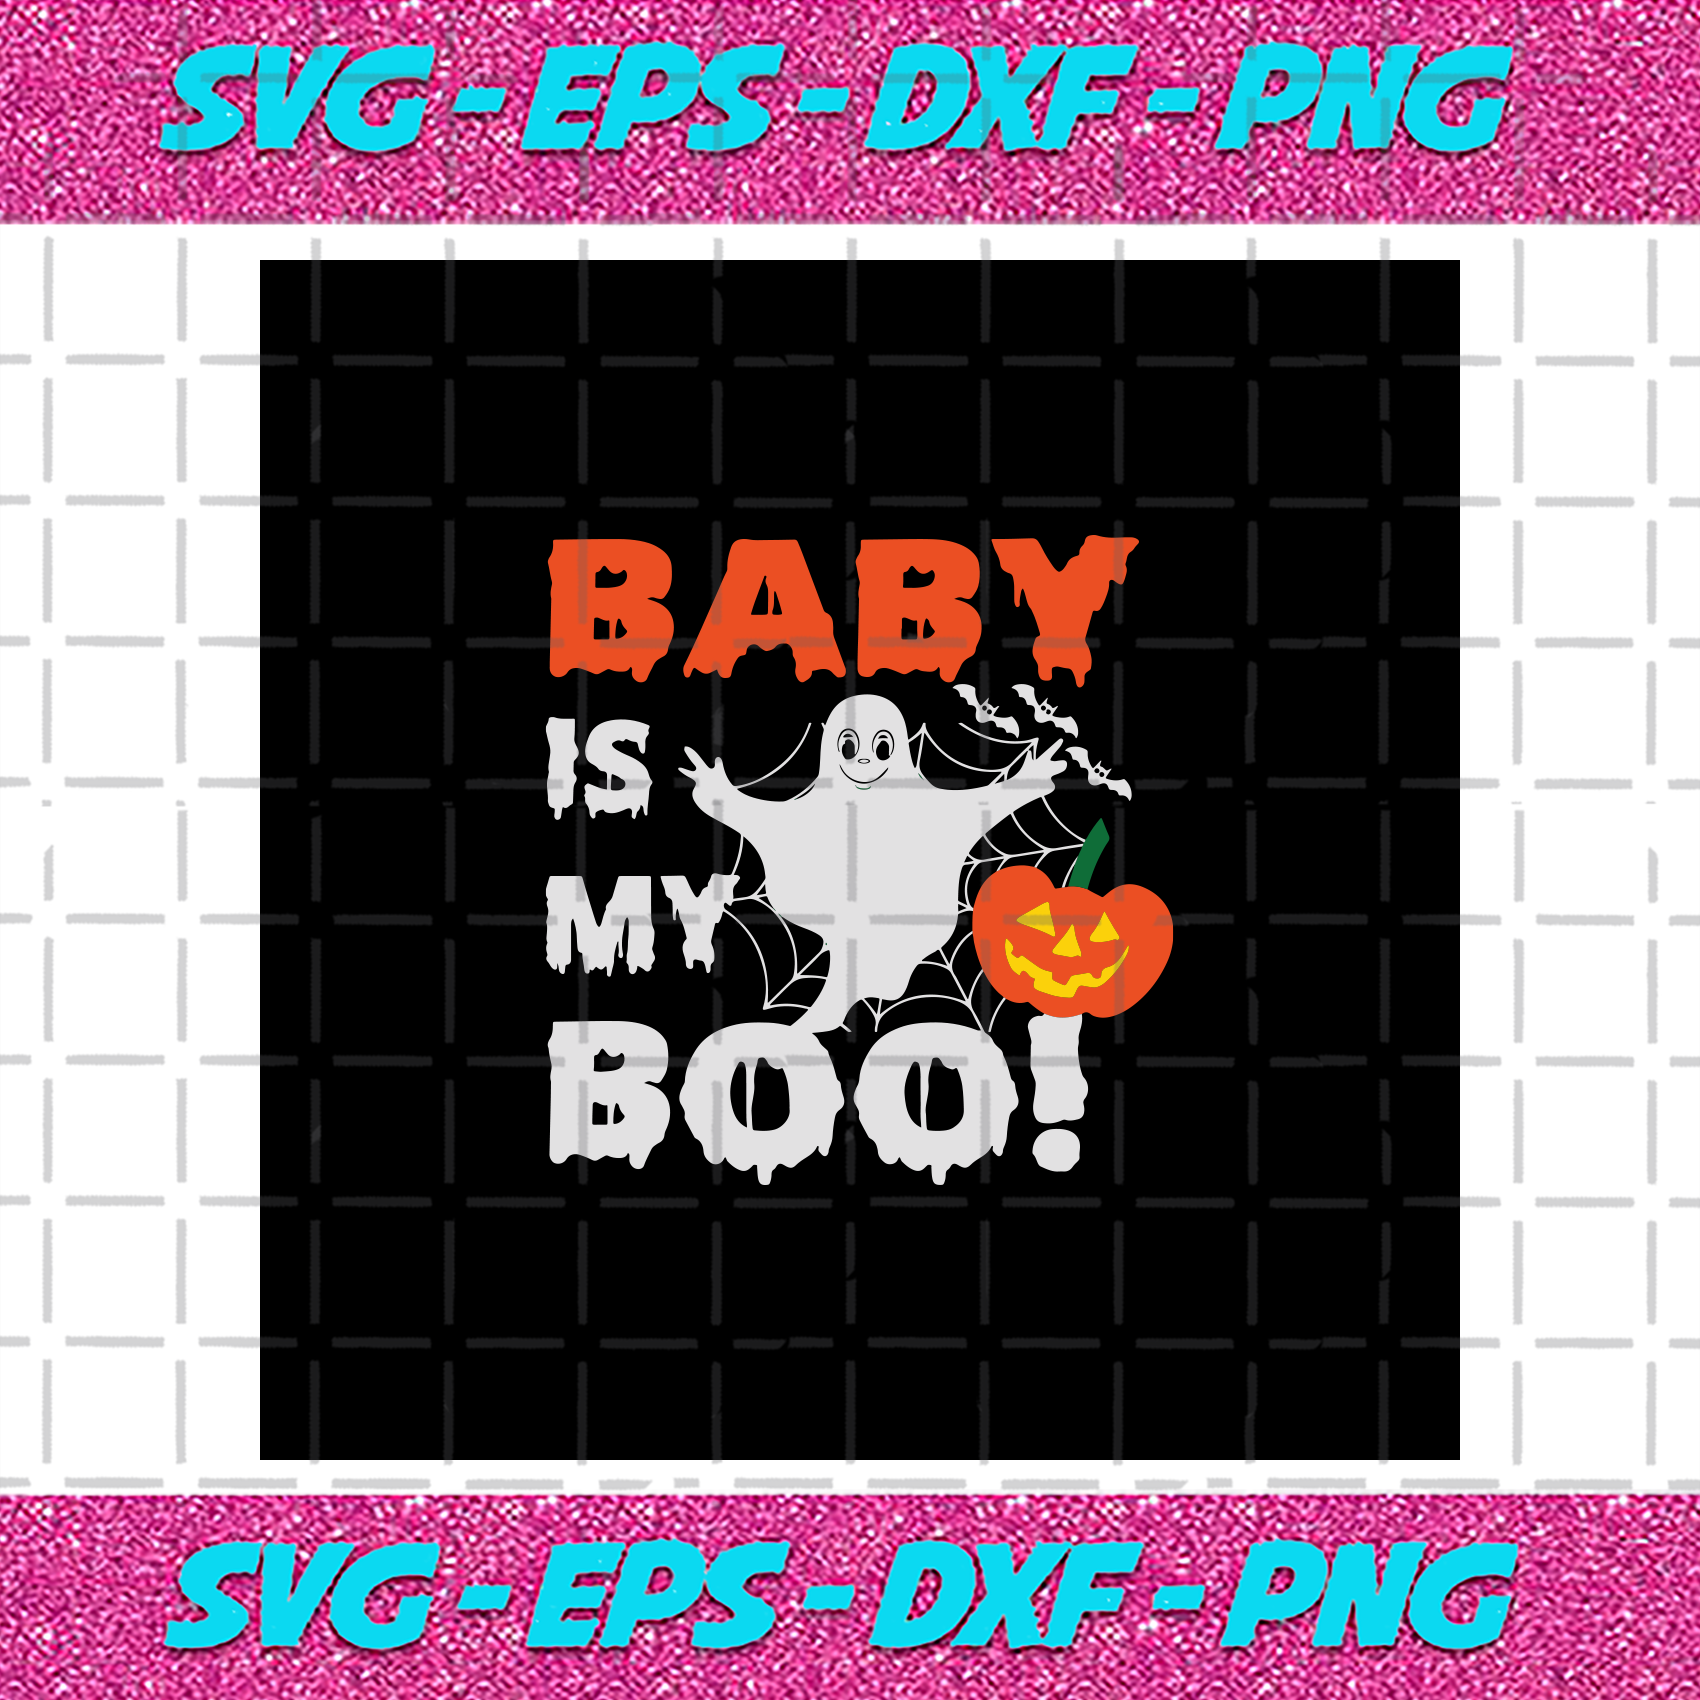 Download Baby Is My Boo Halloween Svg Halloween Clipart Halloween Vector Halloween Gift Halloween Shirts Boo Svg Boo Shirts Pumpkin Halloween Gift Svg Cricut Silhouette Svg Files Cricut Svg Silhouette Svg Svg Designs